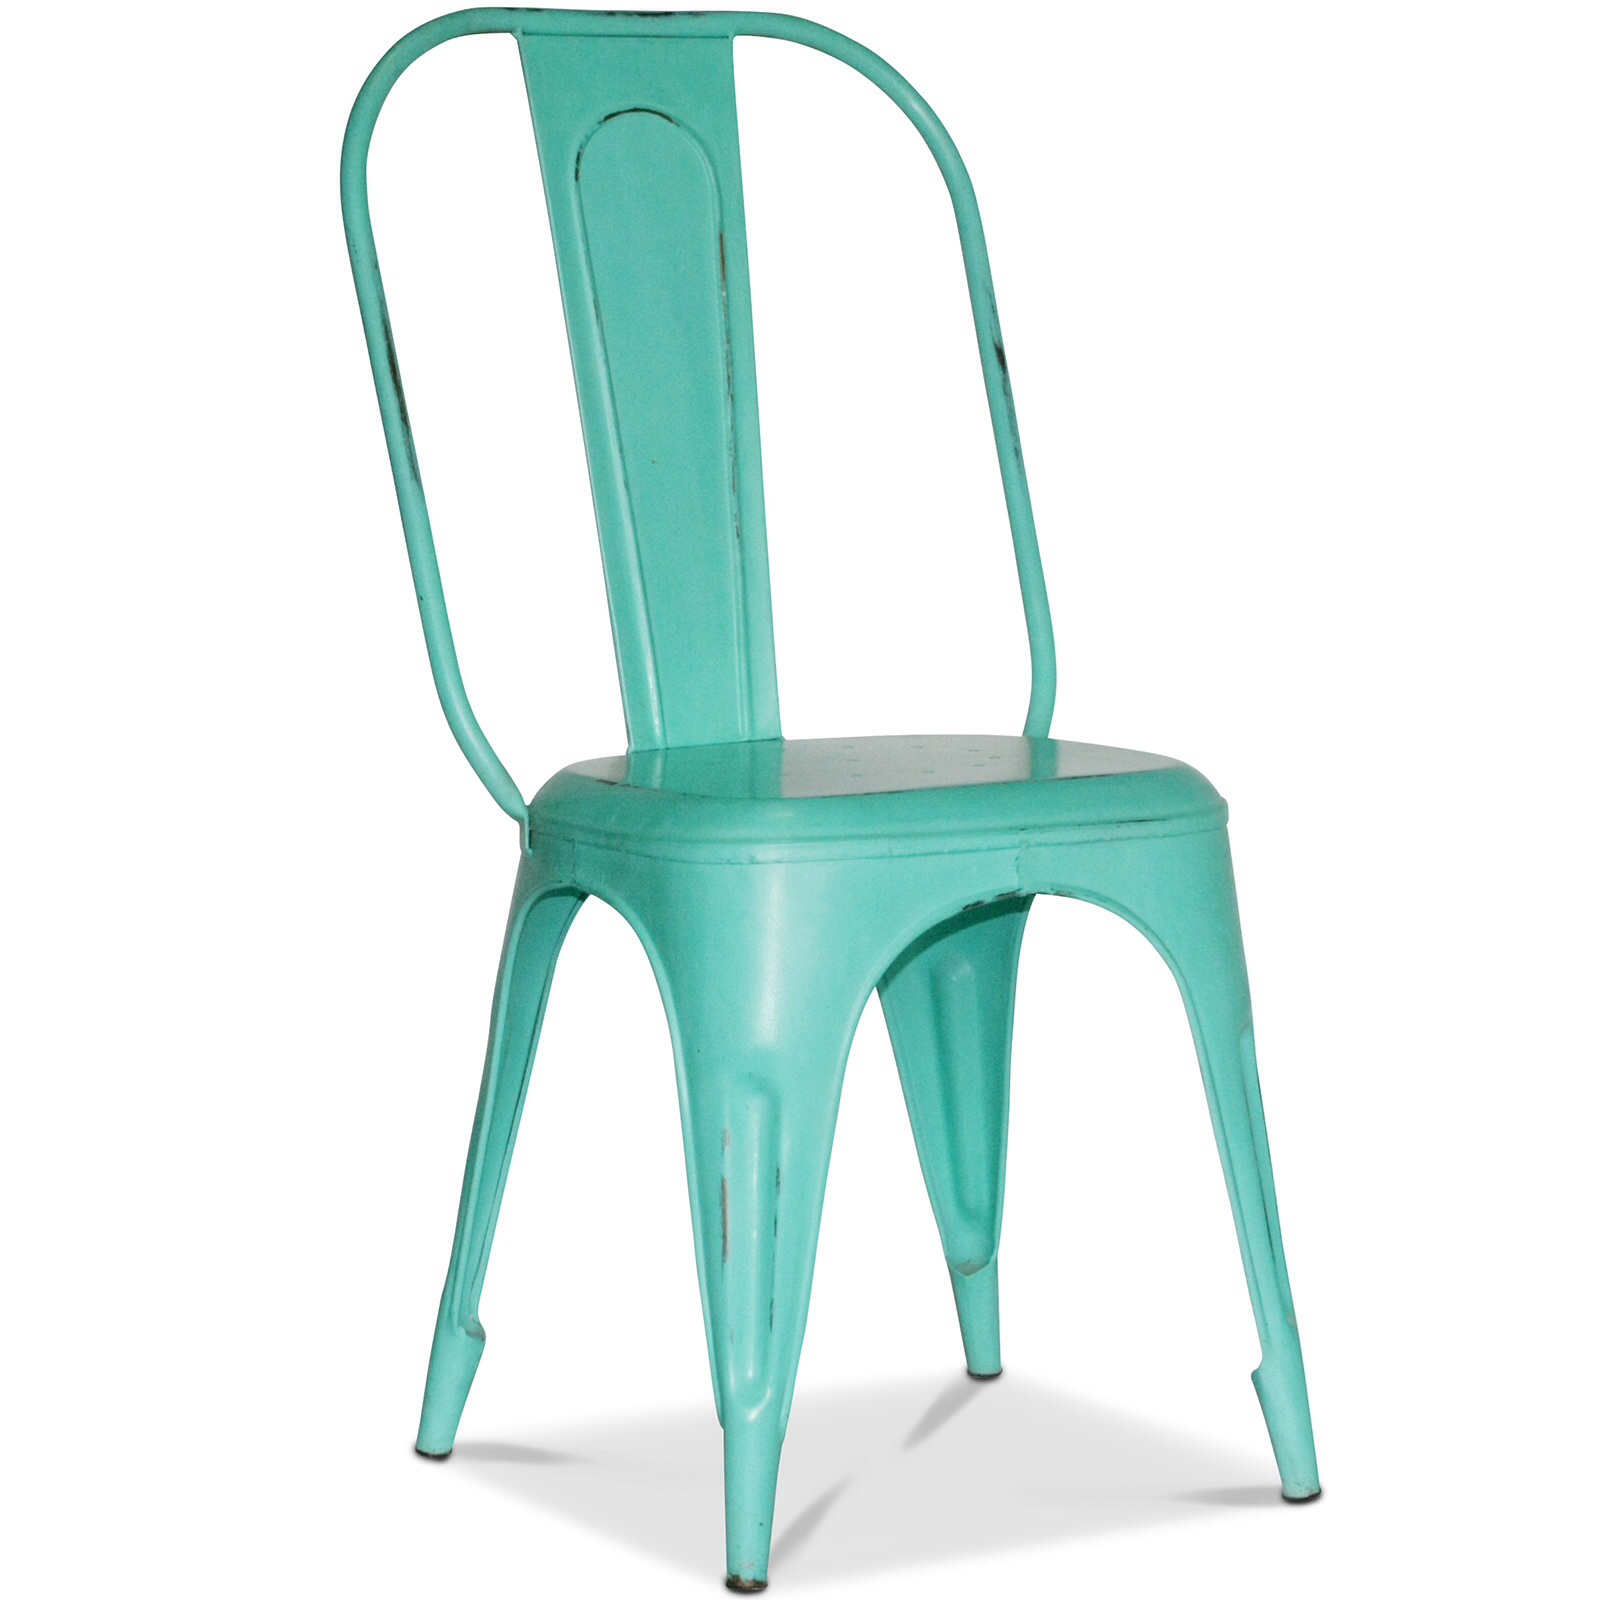 Bistro Retro Chair 450 mm high weathered Light Turquoise 